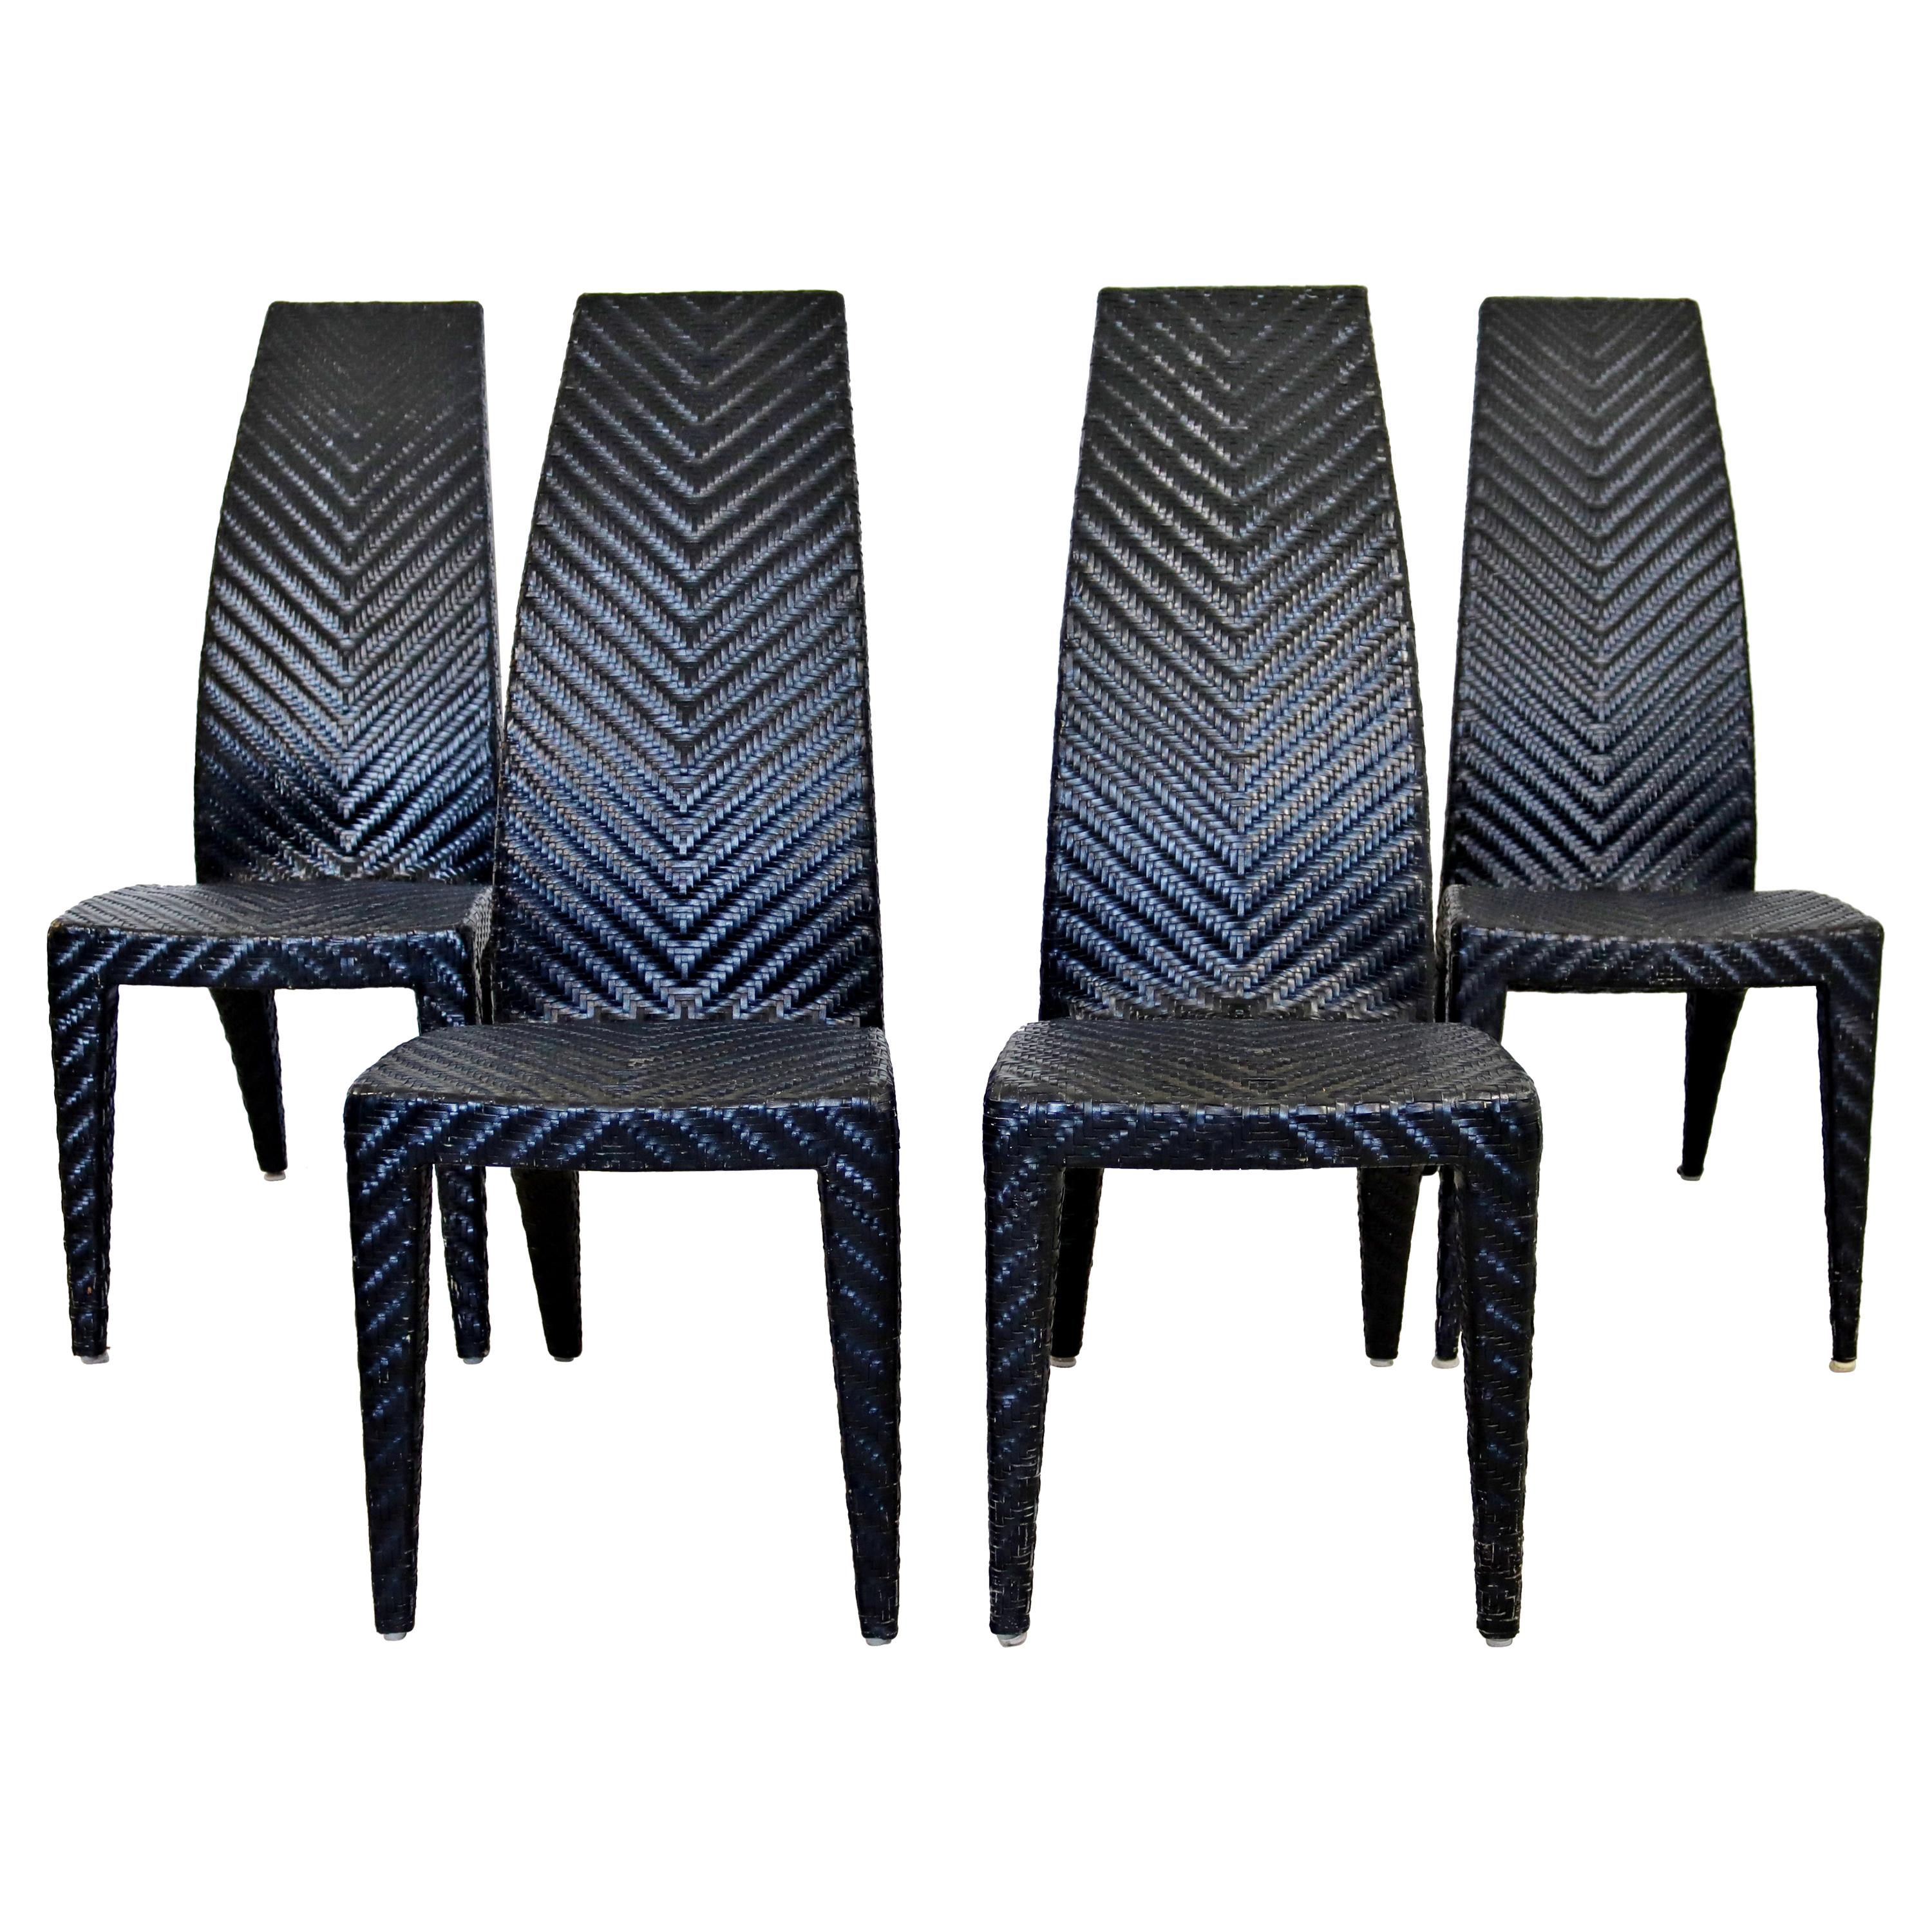 Contemporary Modern Set of 4 Gazelle Style Rattan Weave Side Dining Chairs 1980s